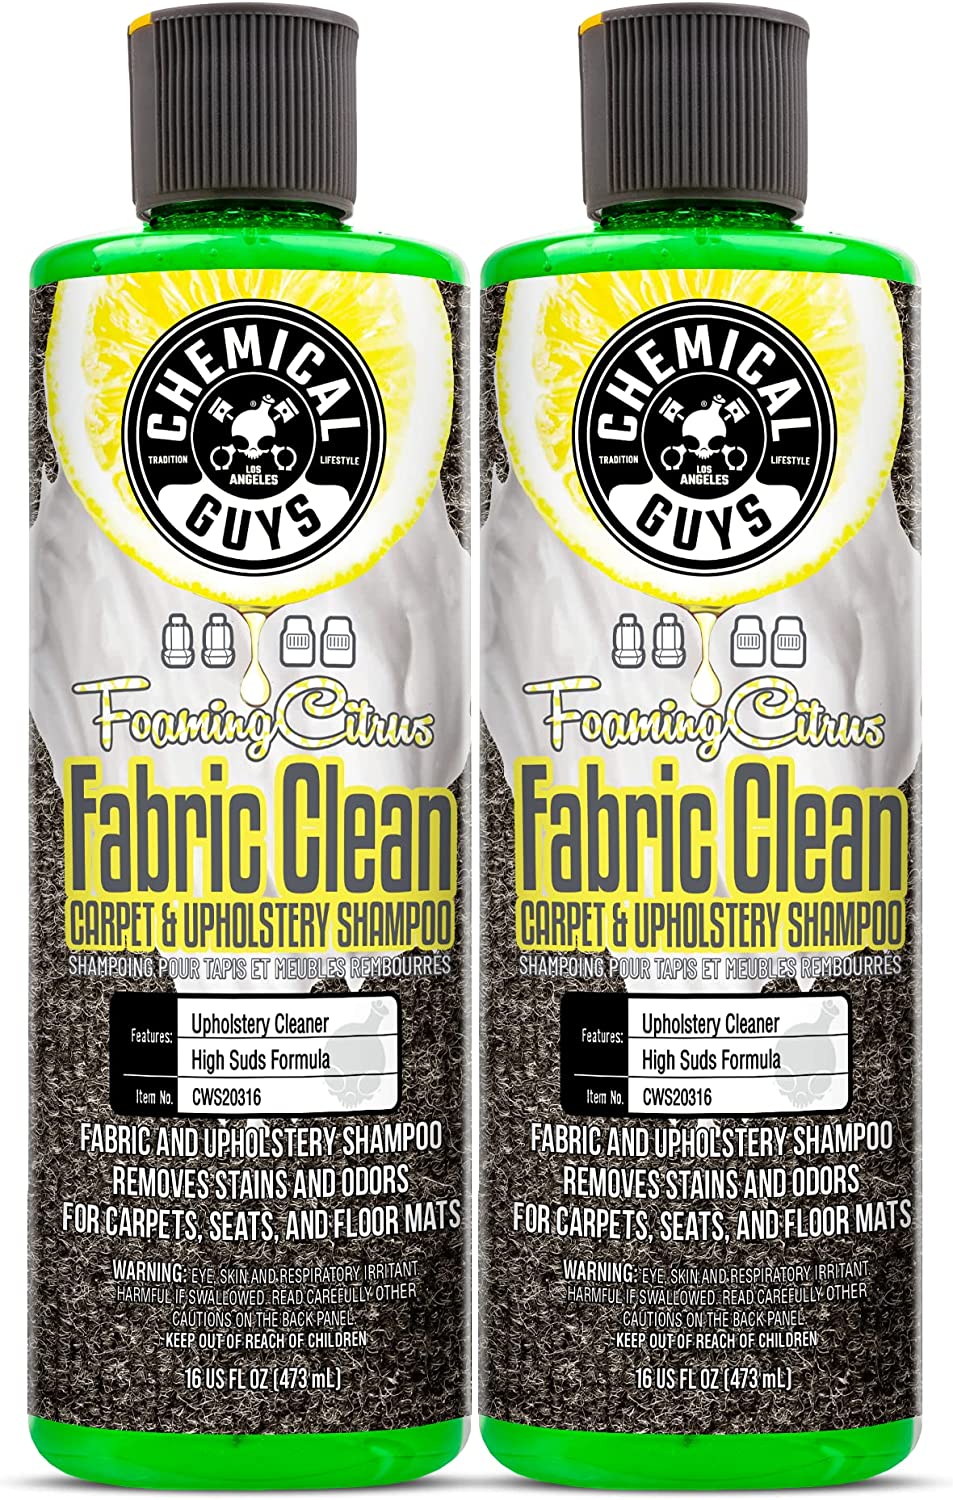 3*NEW*Chemical Guys Foaming Citrus Fabric Clean Carpet & Upholstery Shampoo  48oz